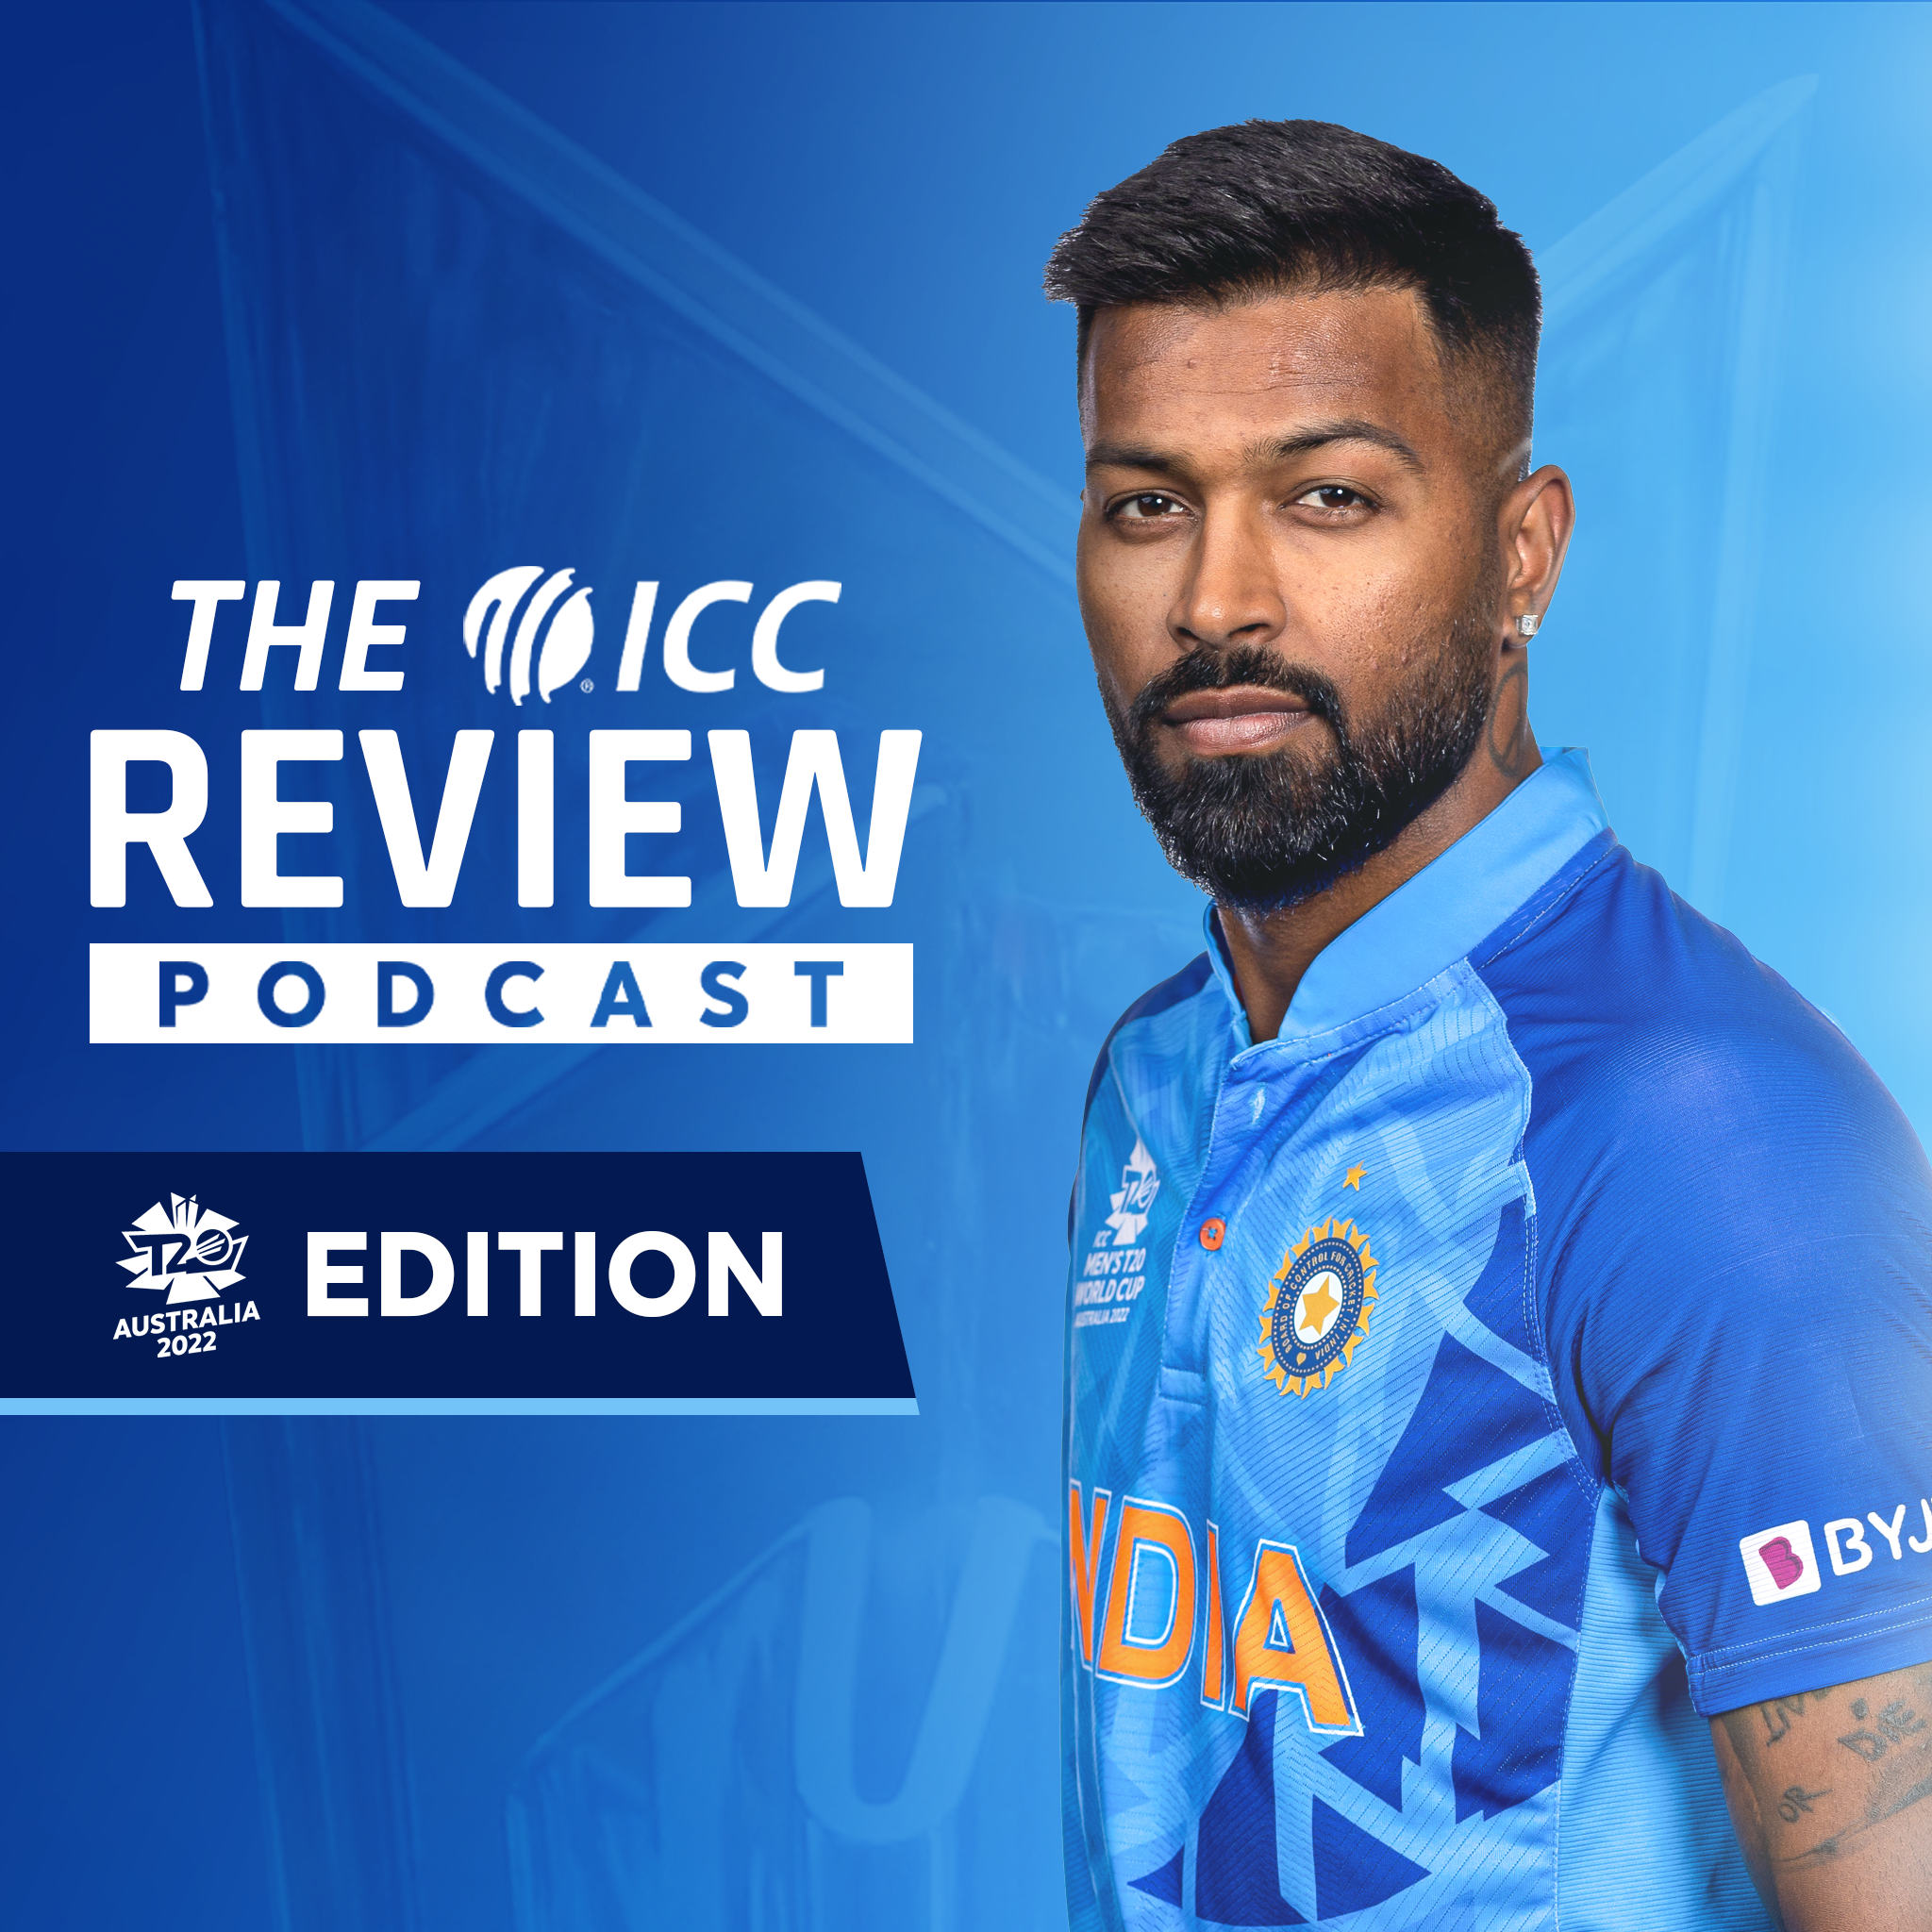 NEW PODCAST: 'He's a genius': Smith on Kohli after India's huge win at the G